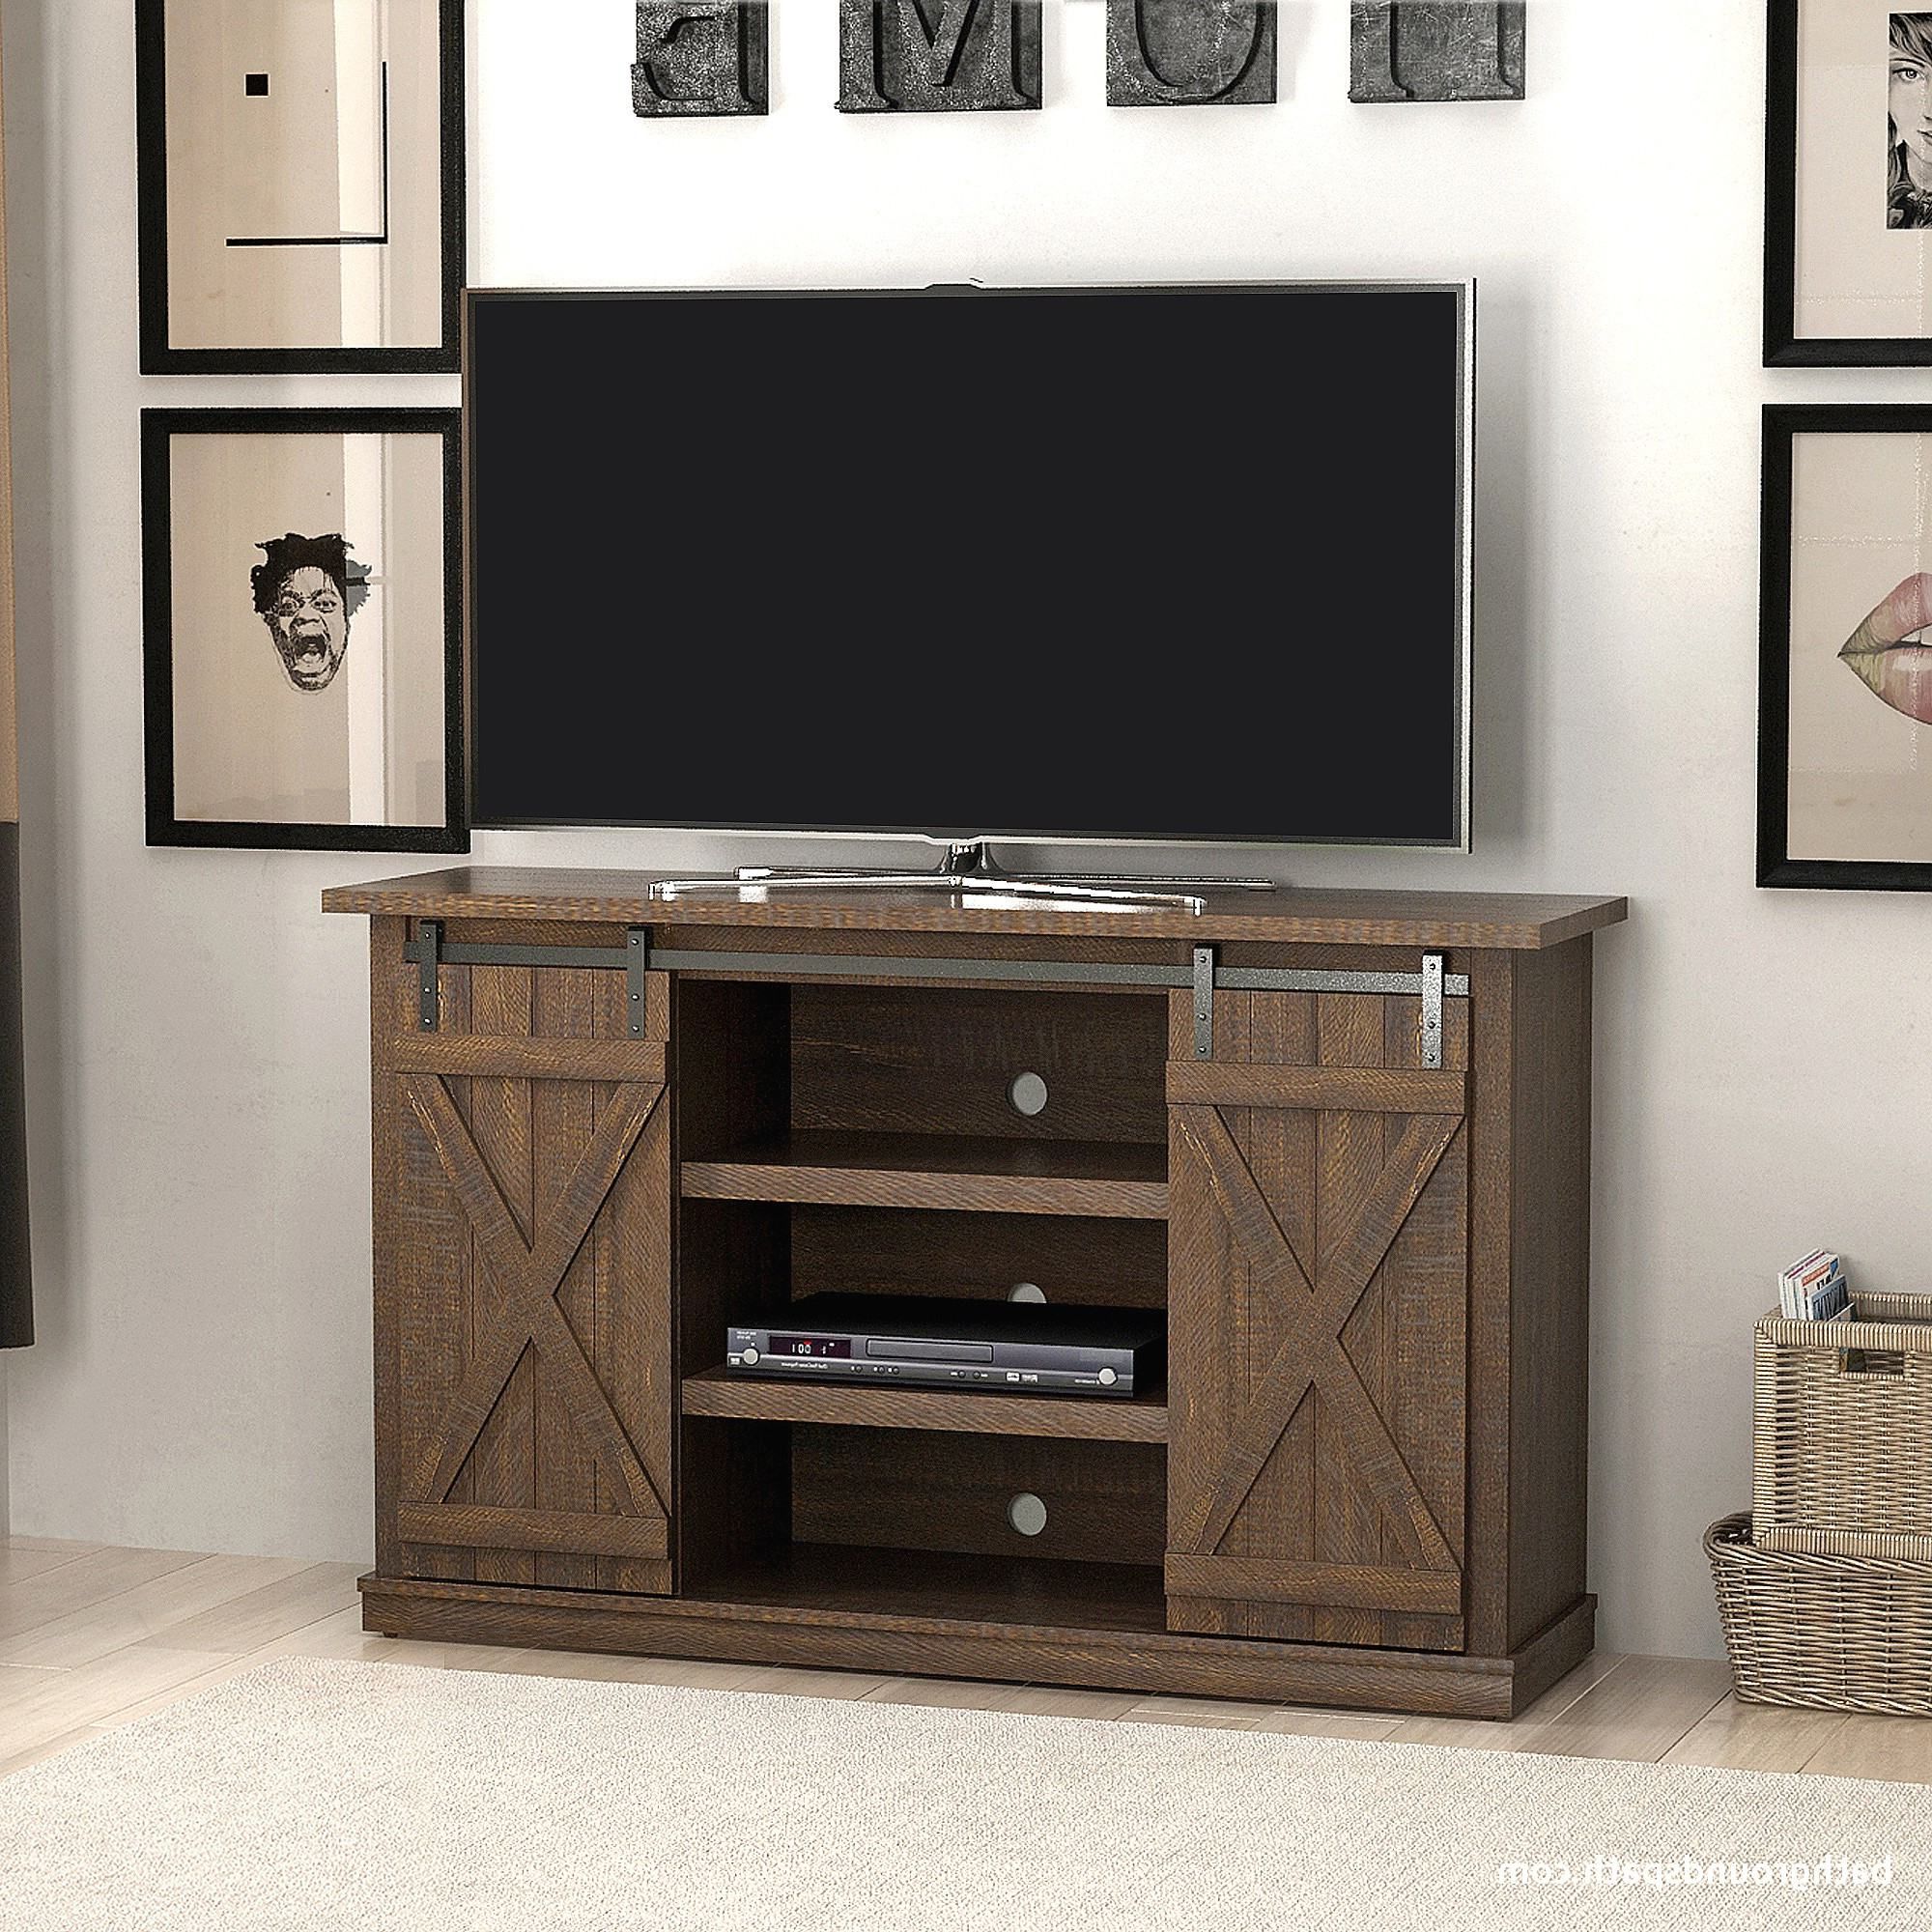 Bookshelf Tv Stands Combo In 2017 Unique Picture 28 Of 39 Bookcase Tv Stand Bo New Tv Stands Bookcase (View 15 of 20)